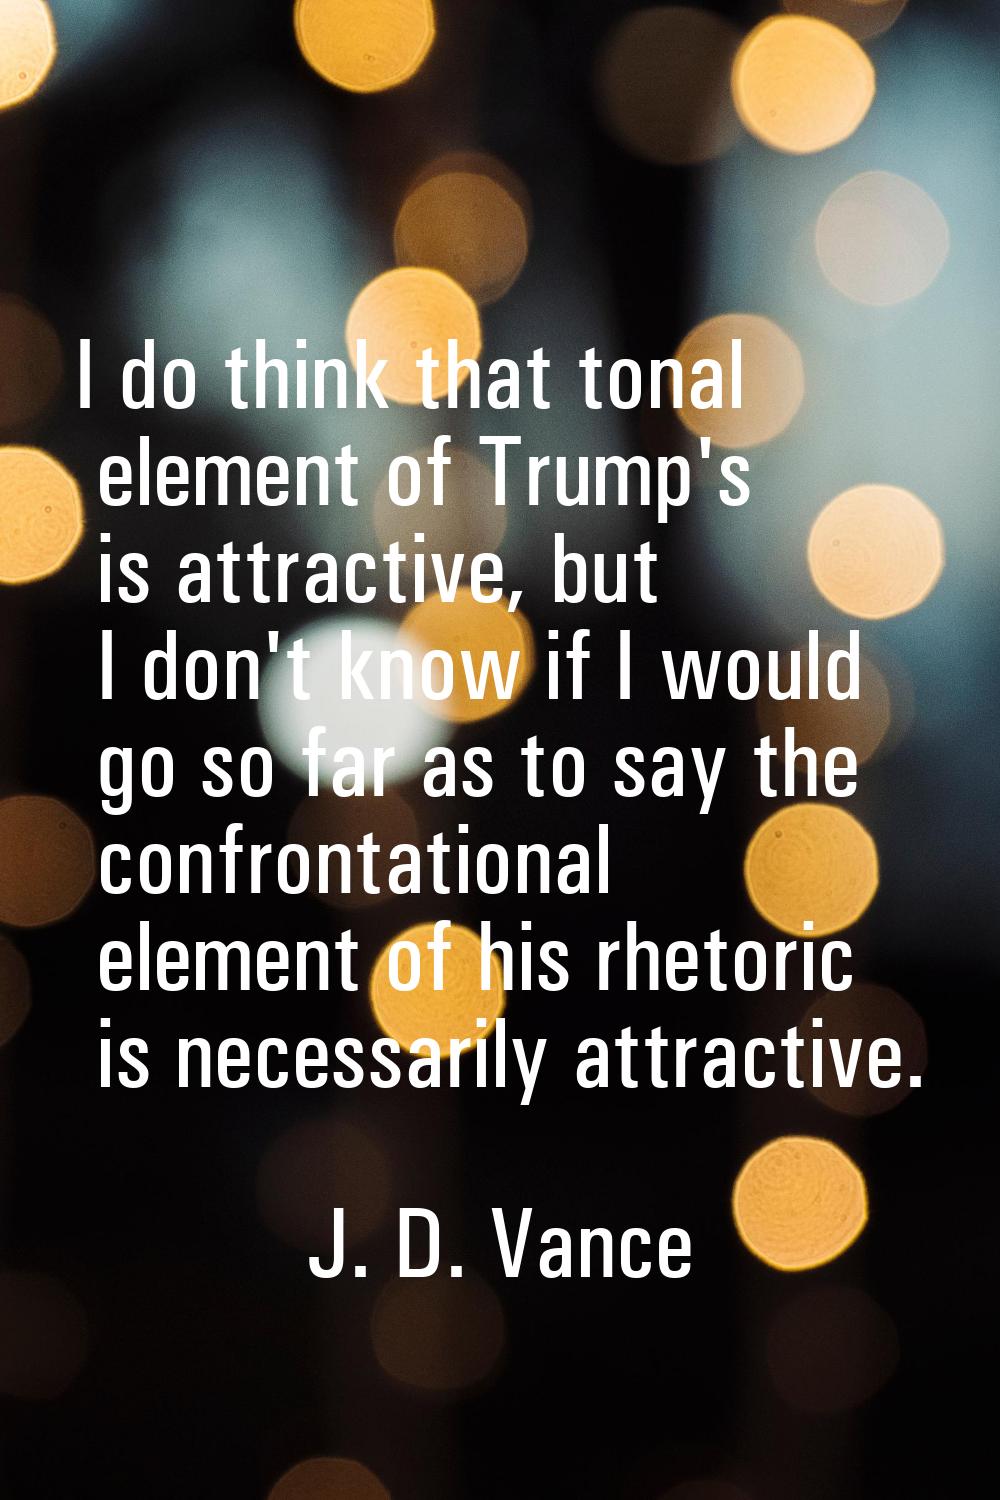 I do think that tonal element of Trump's is attractive, but I don't know if I would go so far as to